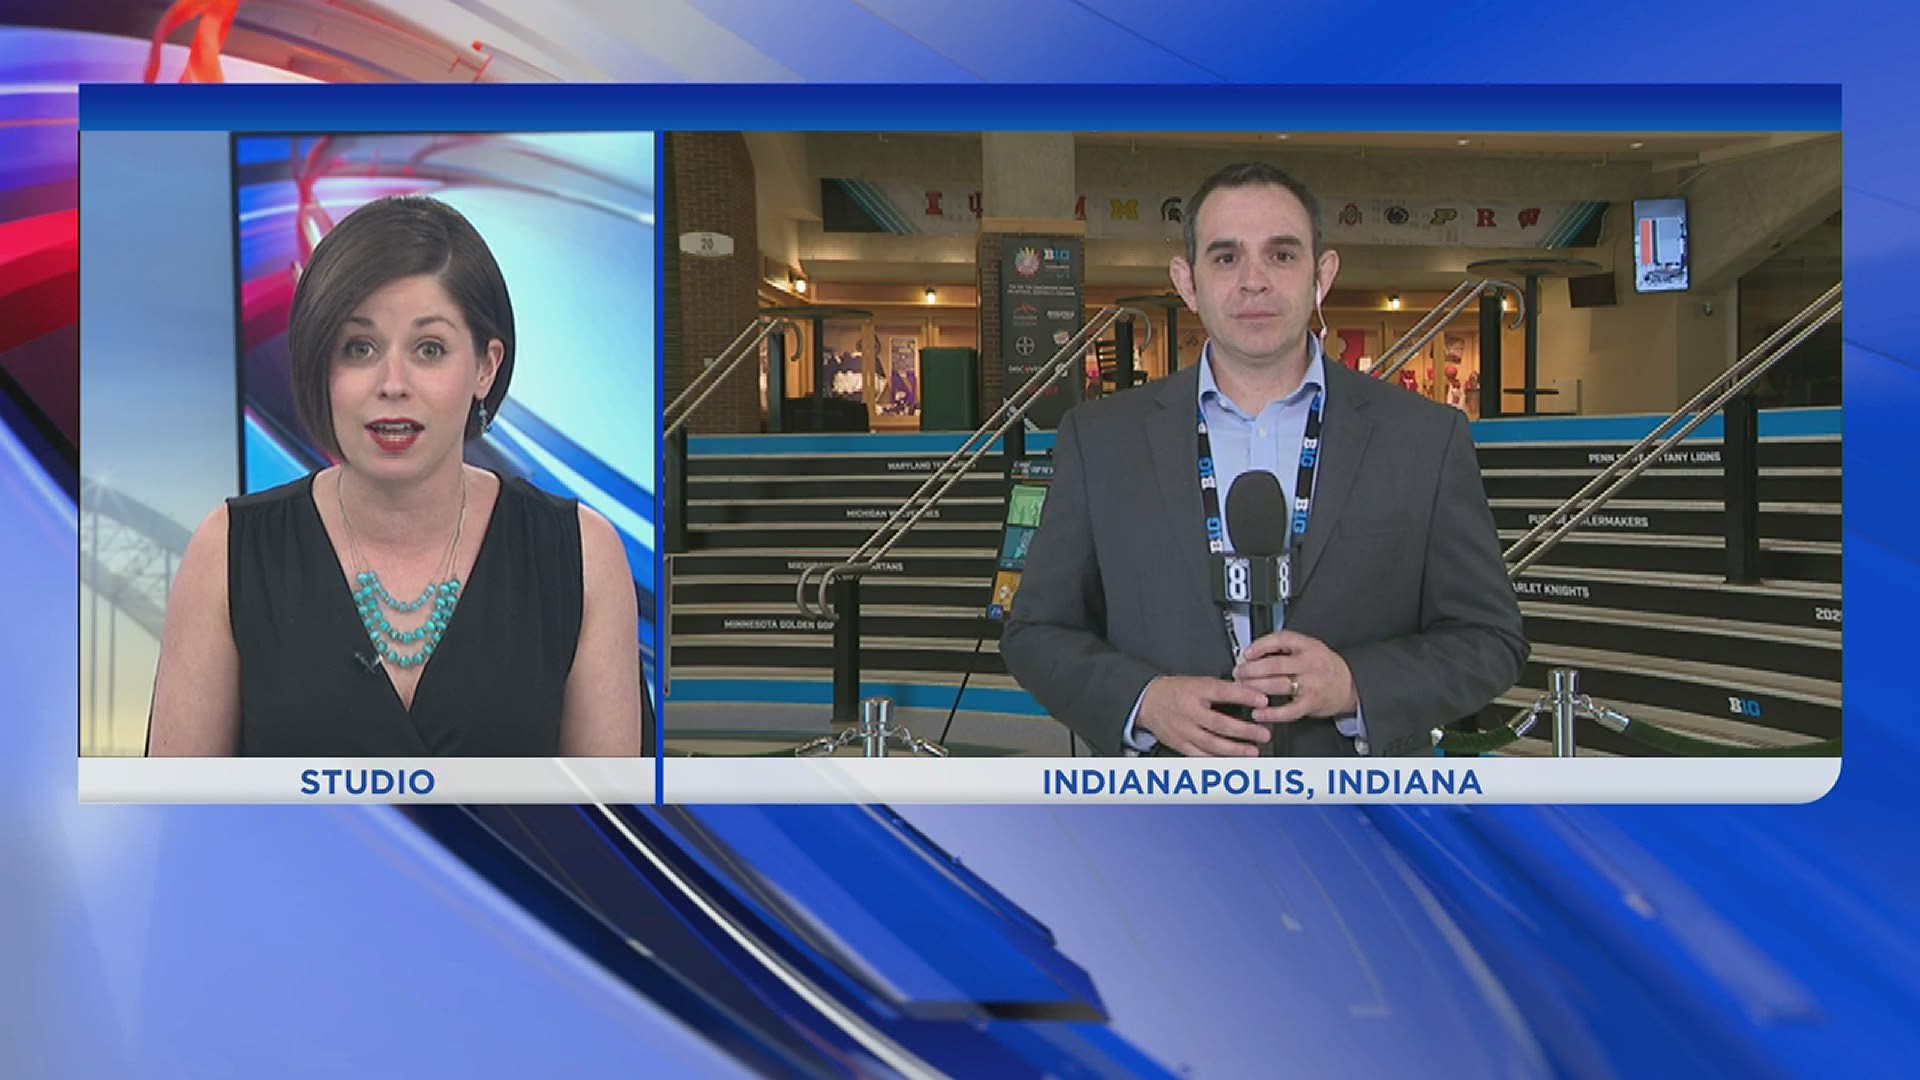 News 8's Sports Director Matt Randazzo was in Indianapolis to cover the tournament, which has now been canceled.